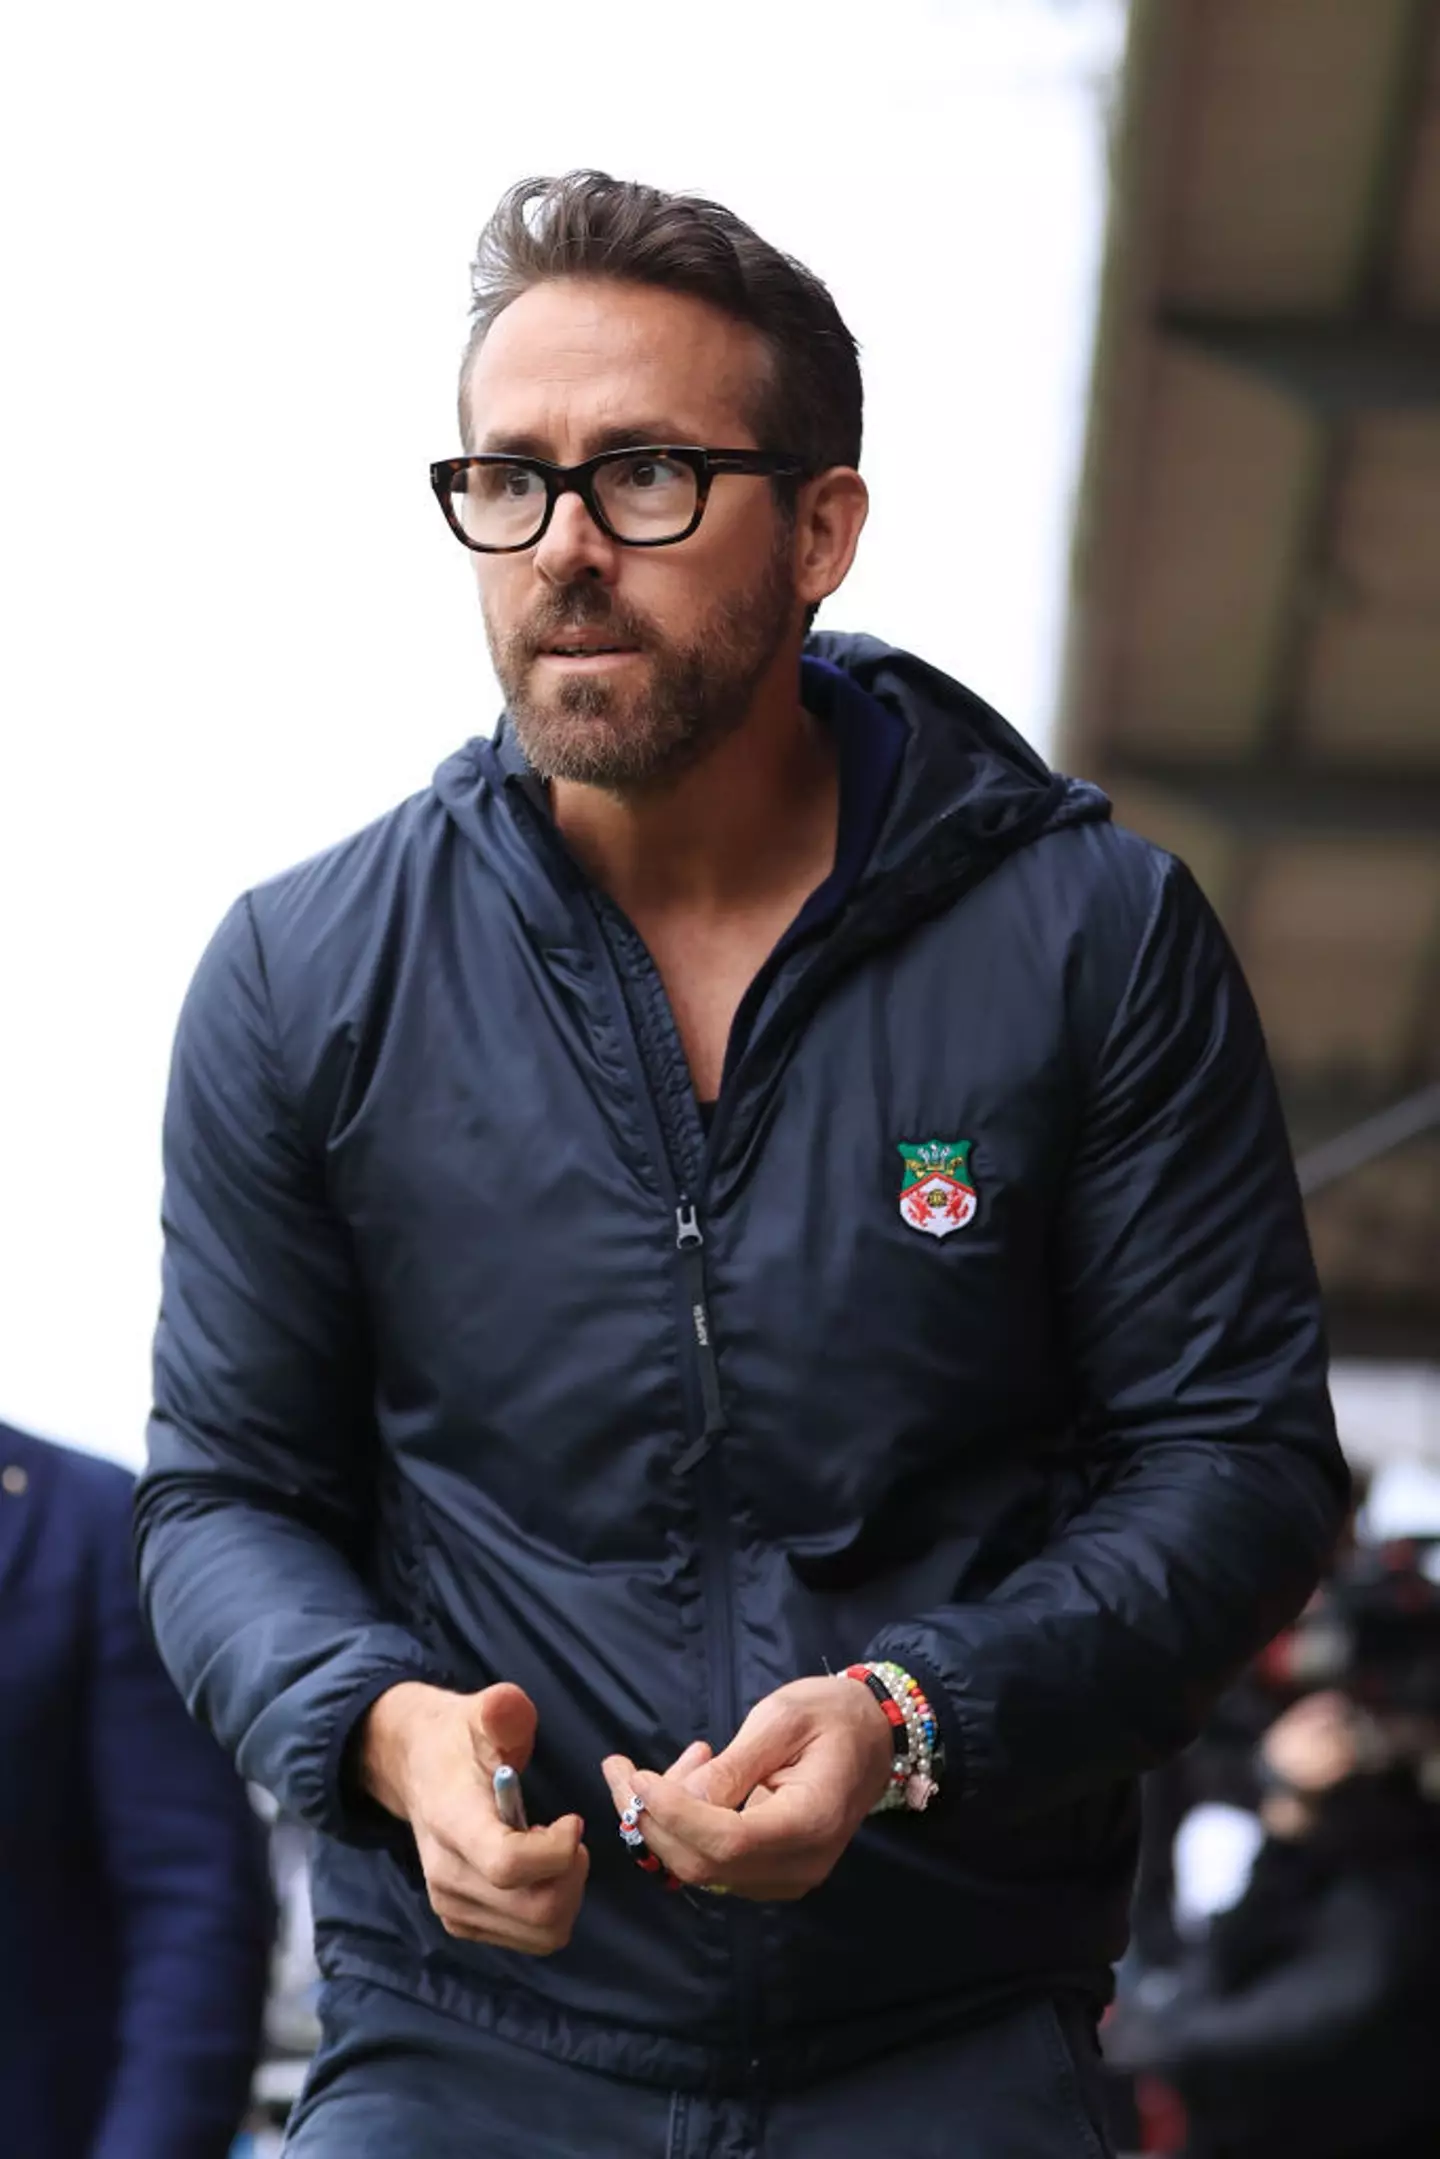 Wrexham co-owner Ryan Reynolds offered to give Laura a second opinion, which provided some relief.